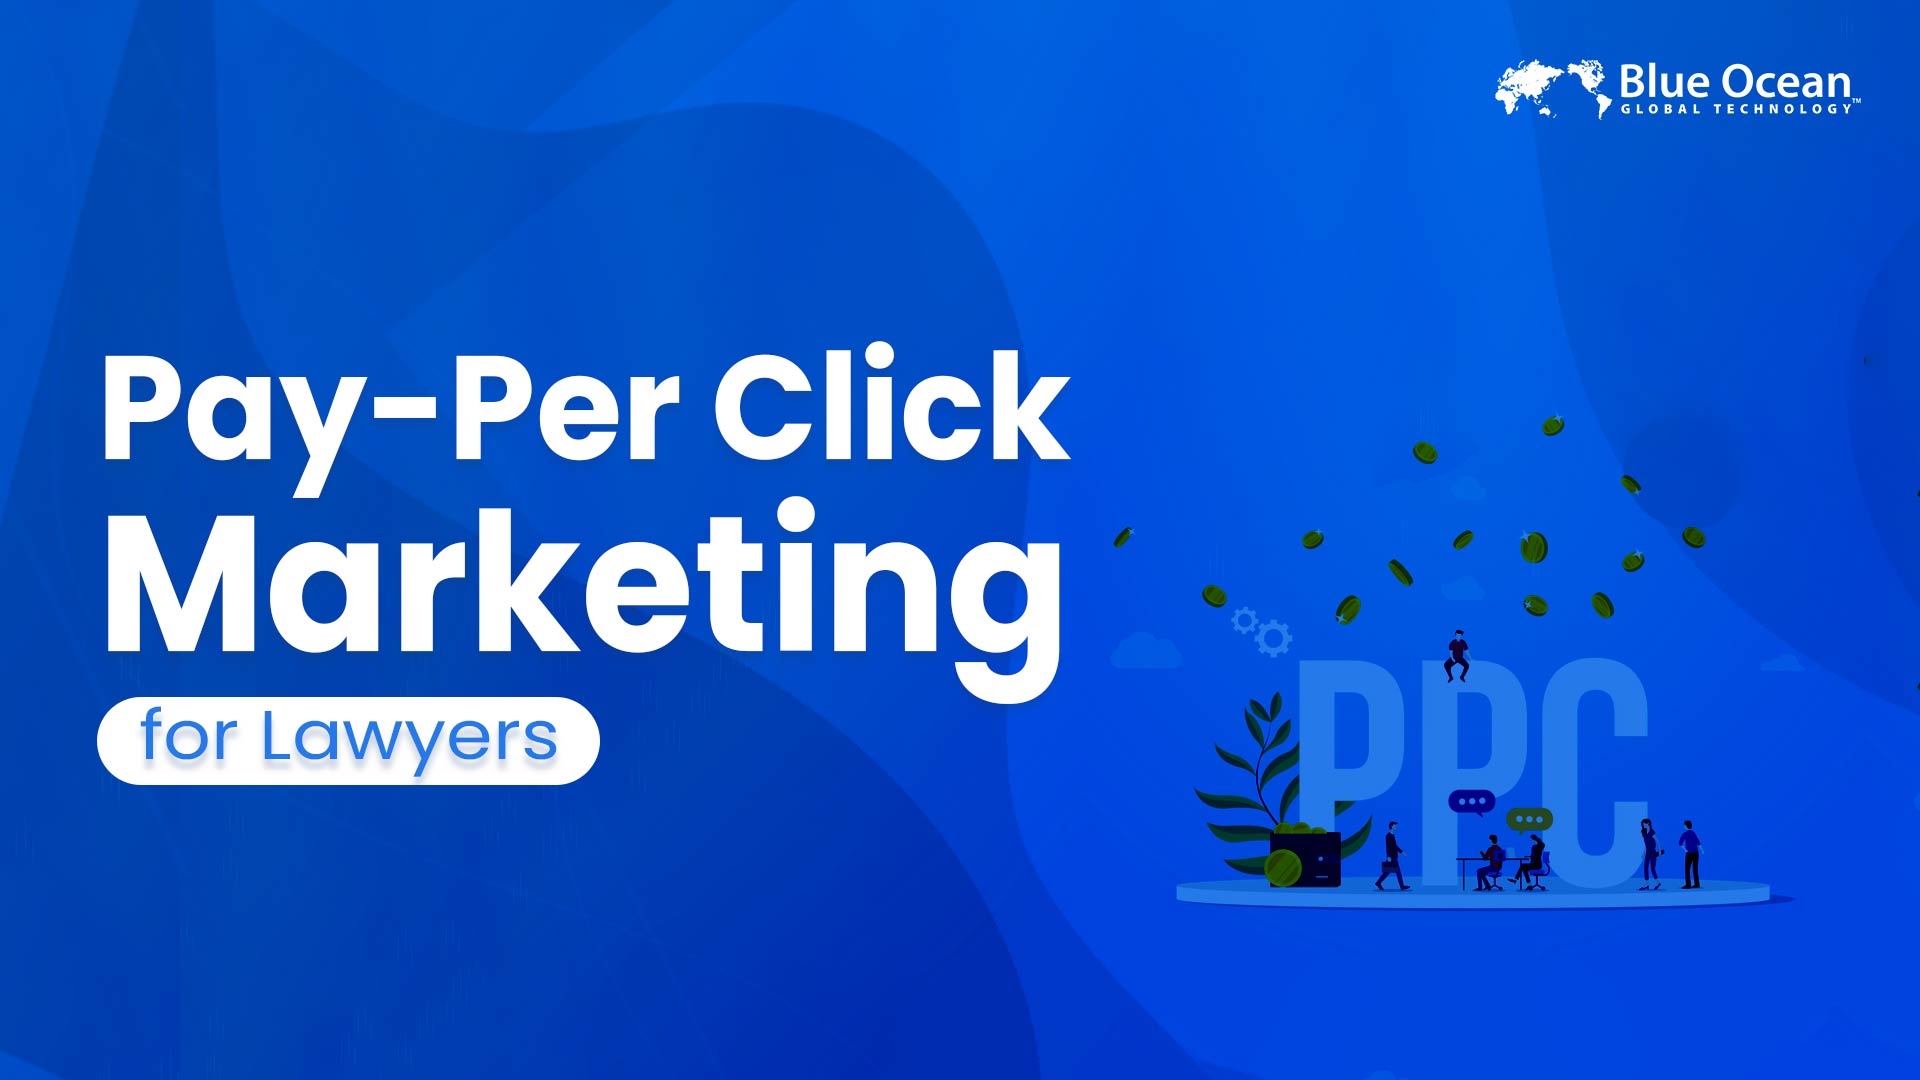 Pay-per-Click Marketing for Lawyers